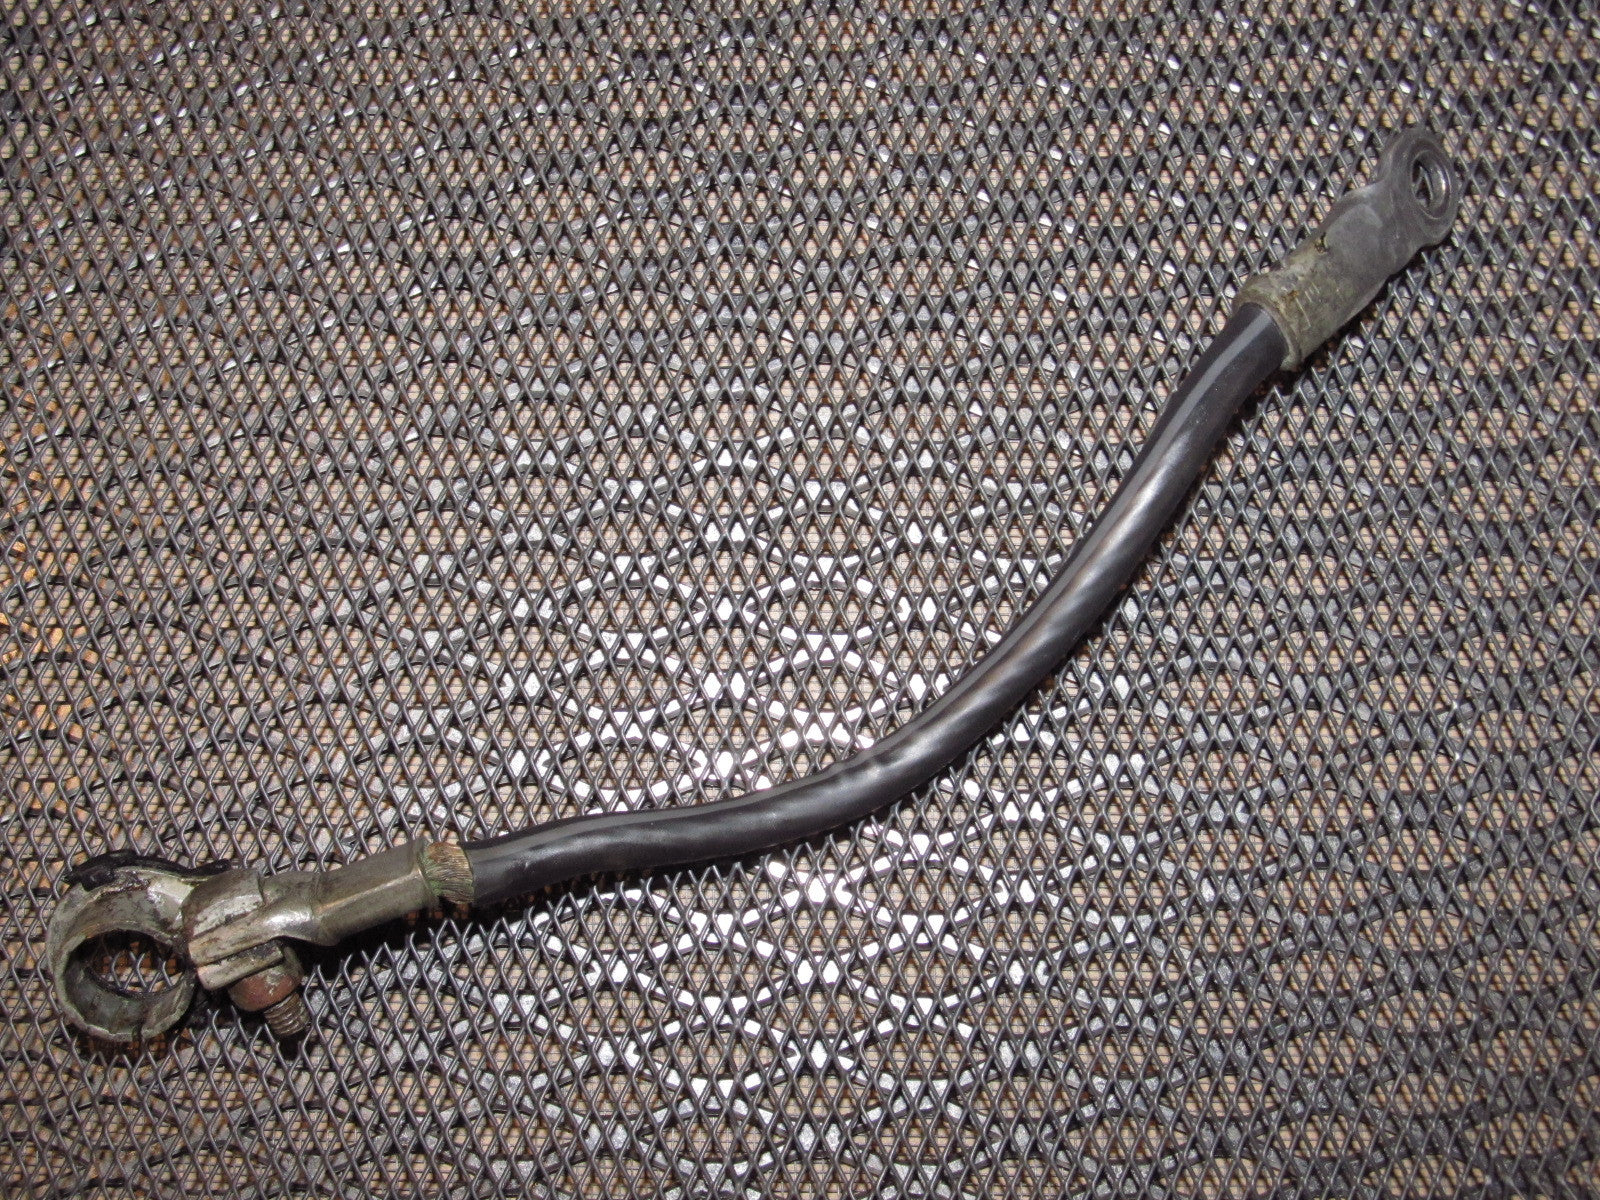 91 92 93 94 95 Toyota MR2 OEM Battery Ground Cable